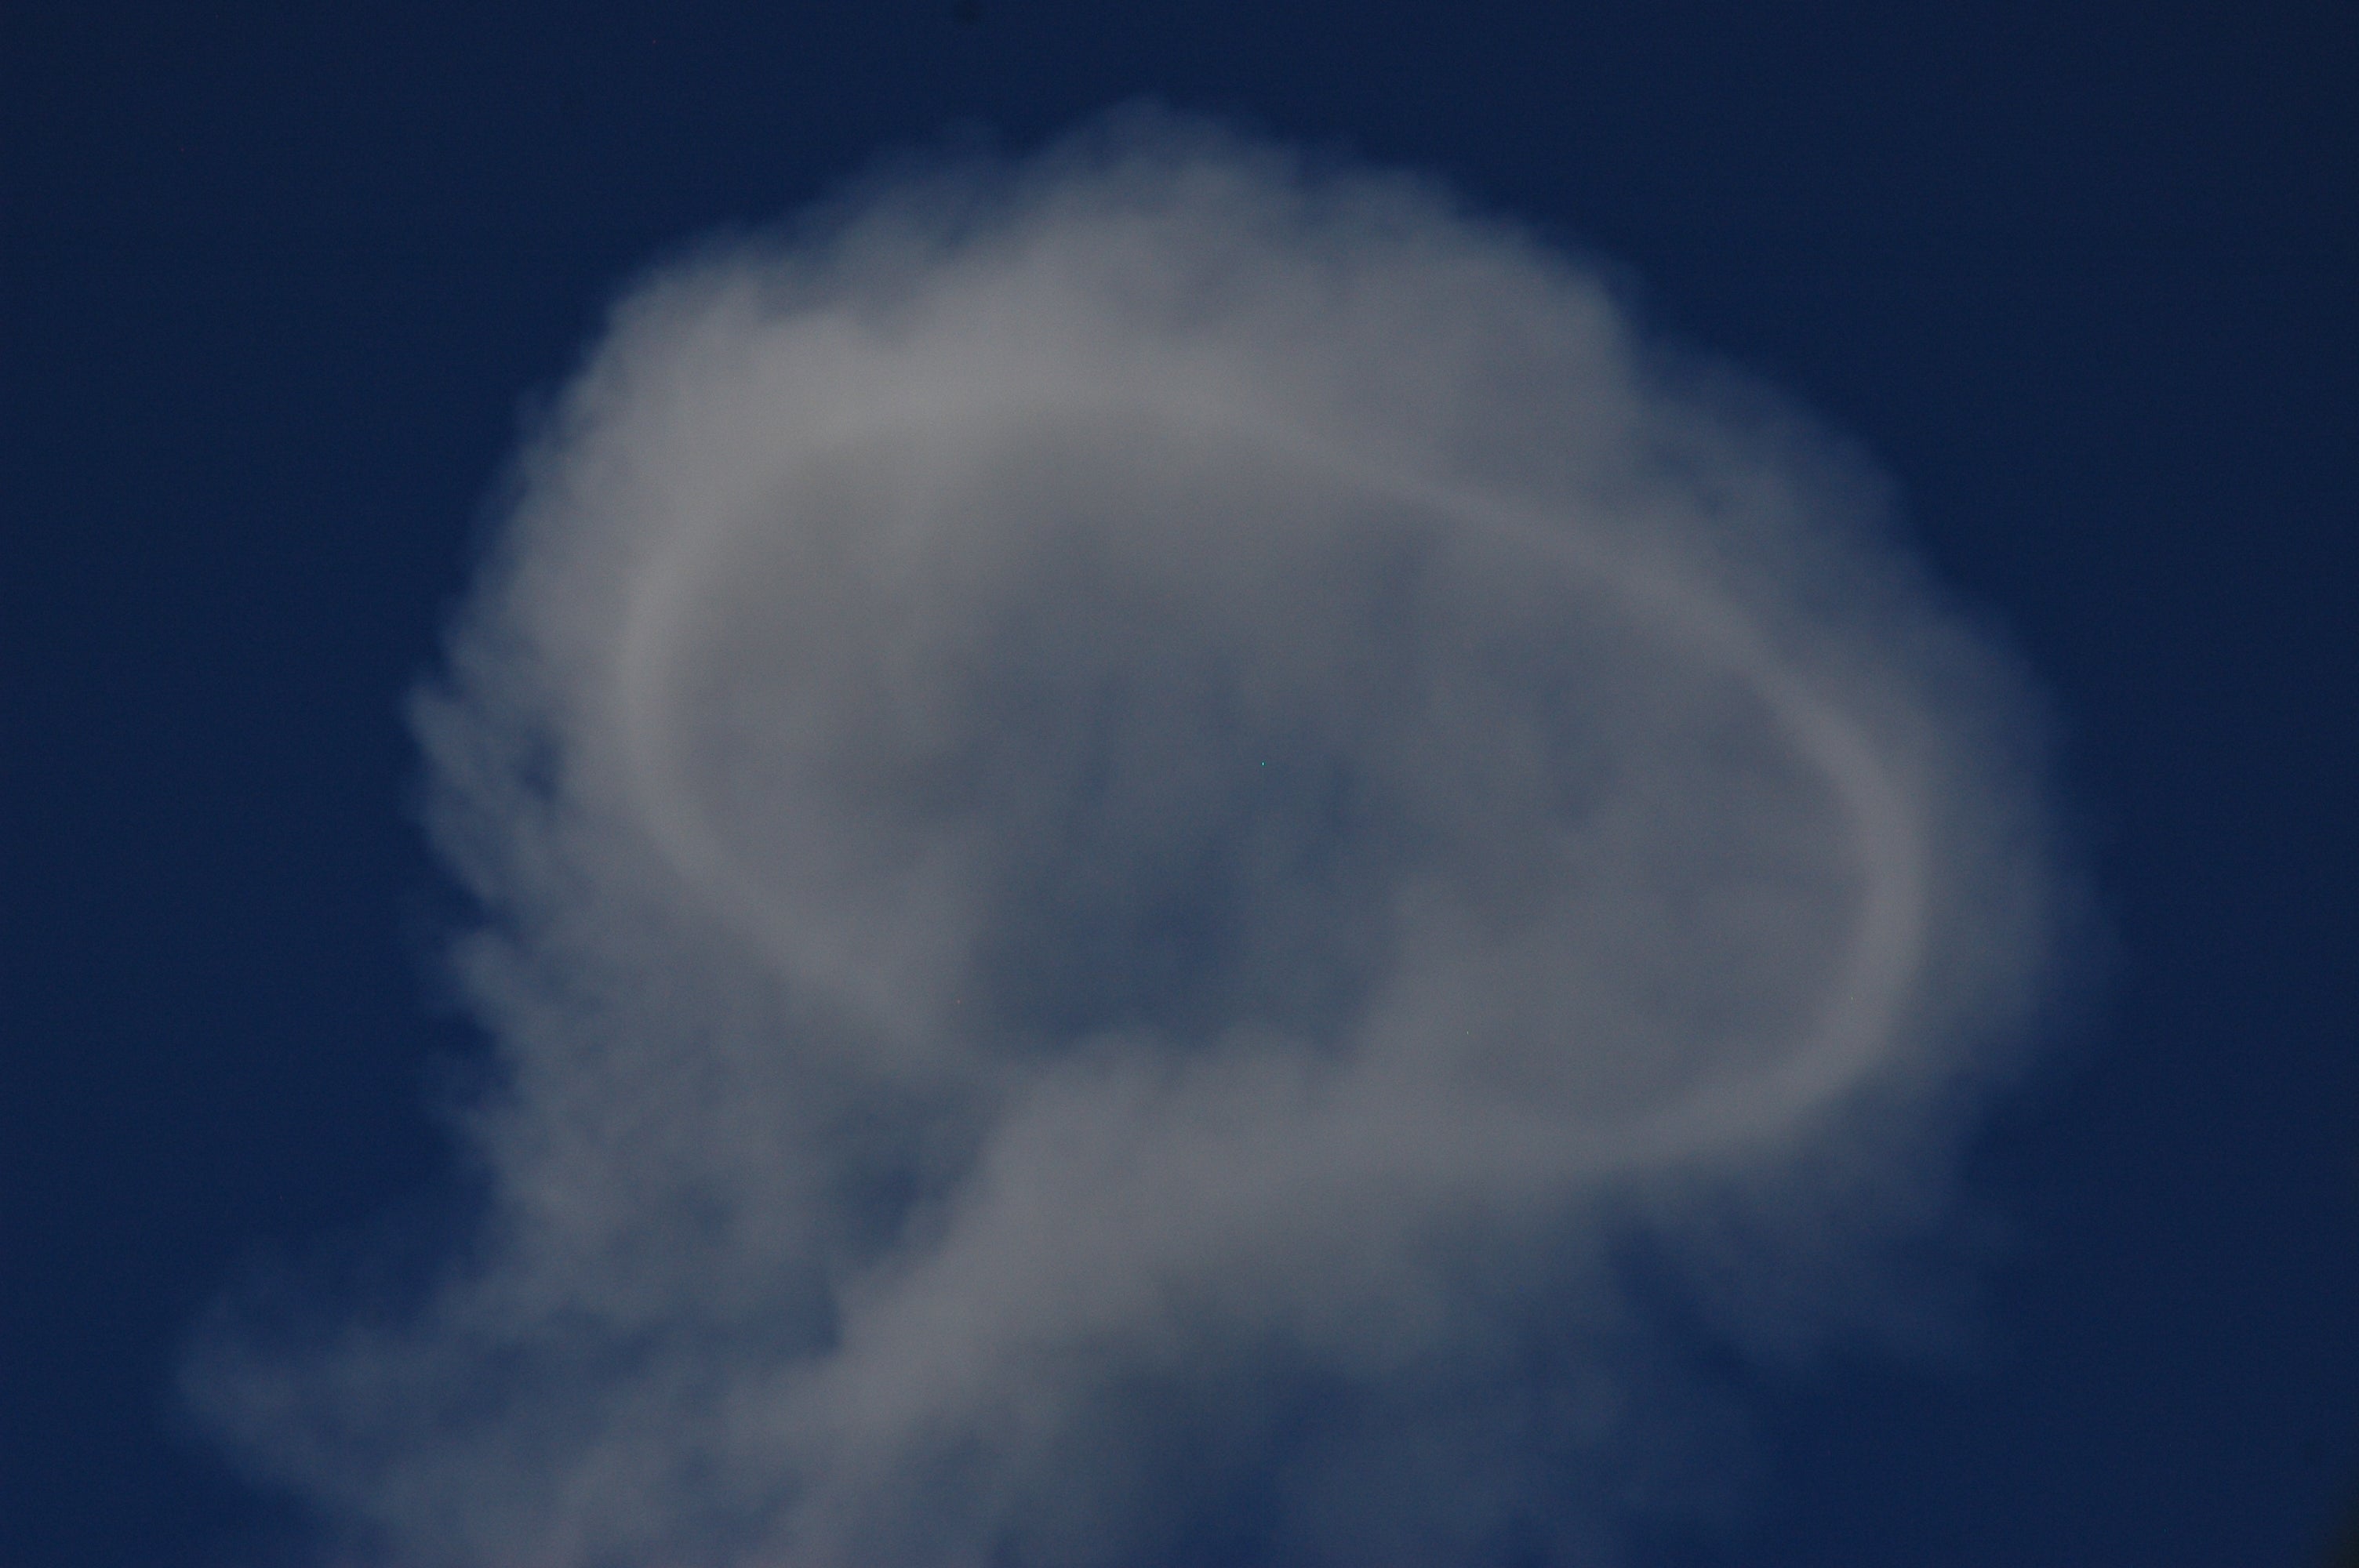 Smoke rings, like this one seen coming from Guatemala’s Fuego volcano, are a relatively rare sighting